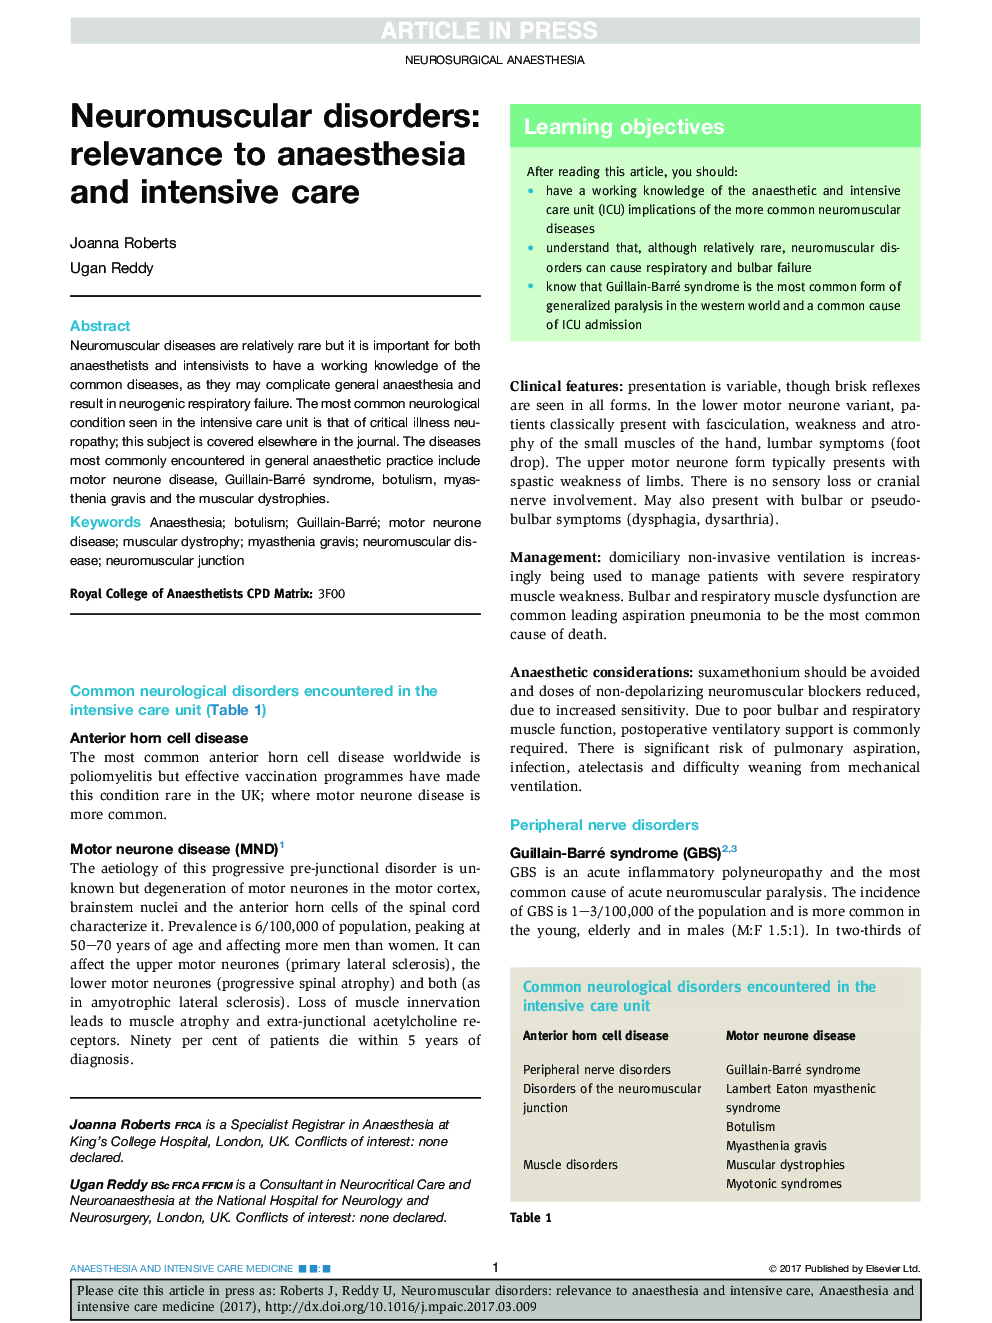 Neuromuscular disorders: relevance to anaesthesia and intensive care